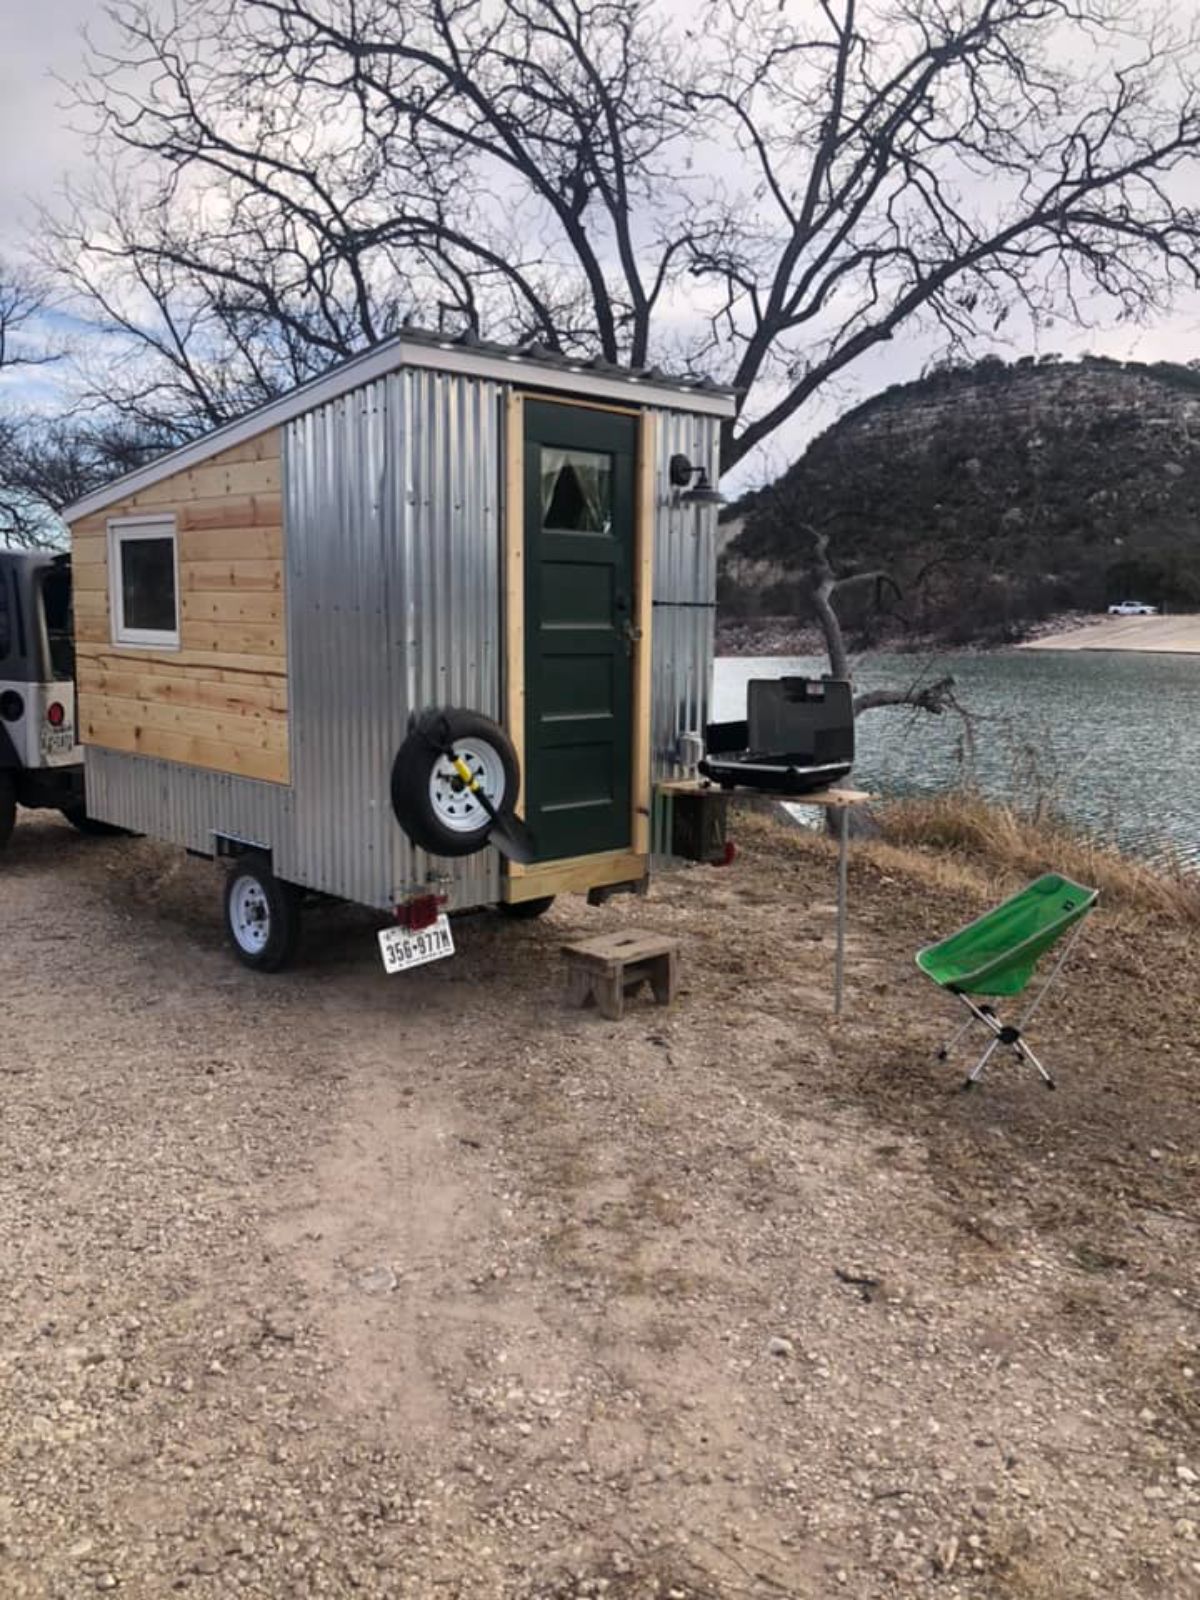 Full long view of lightweight tiny home from outside